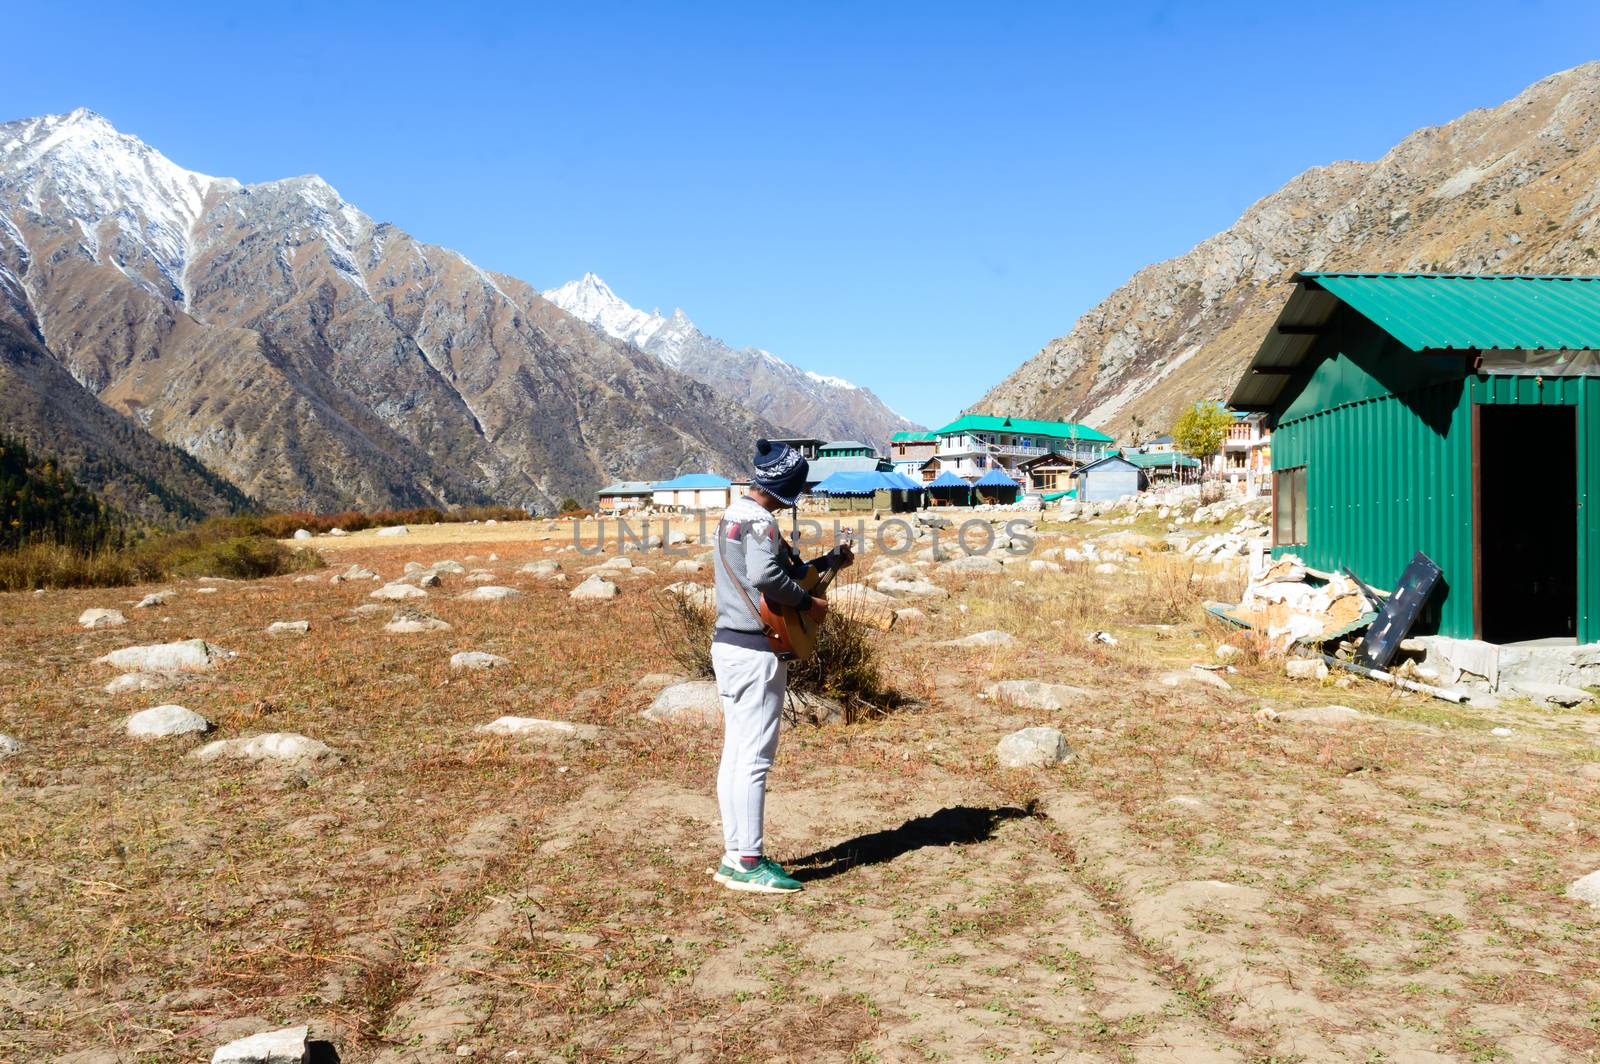 A solo traveler hobbyist musician playing guitar alone in the silence of Himalayan mountain valley and sound of guitar strings. Summer music Inspiring environment in outdoors. Sangla India South Asia.